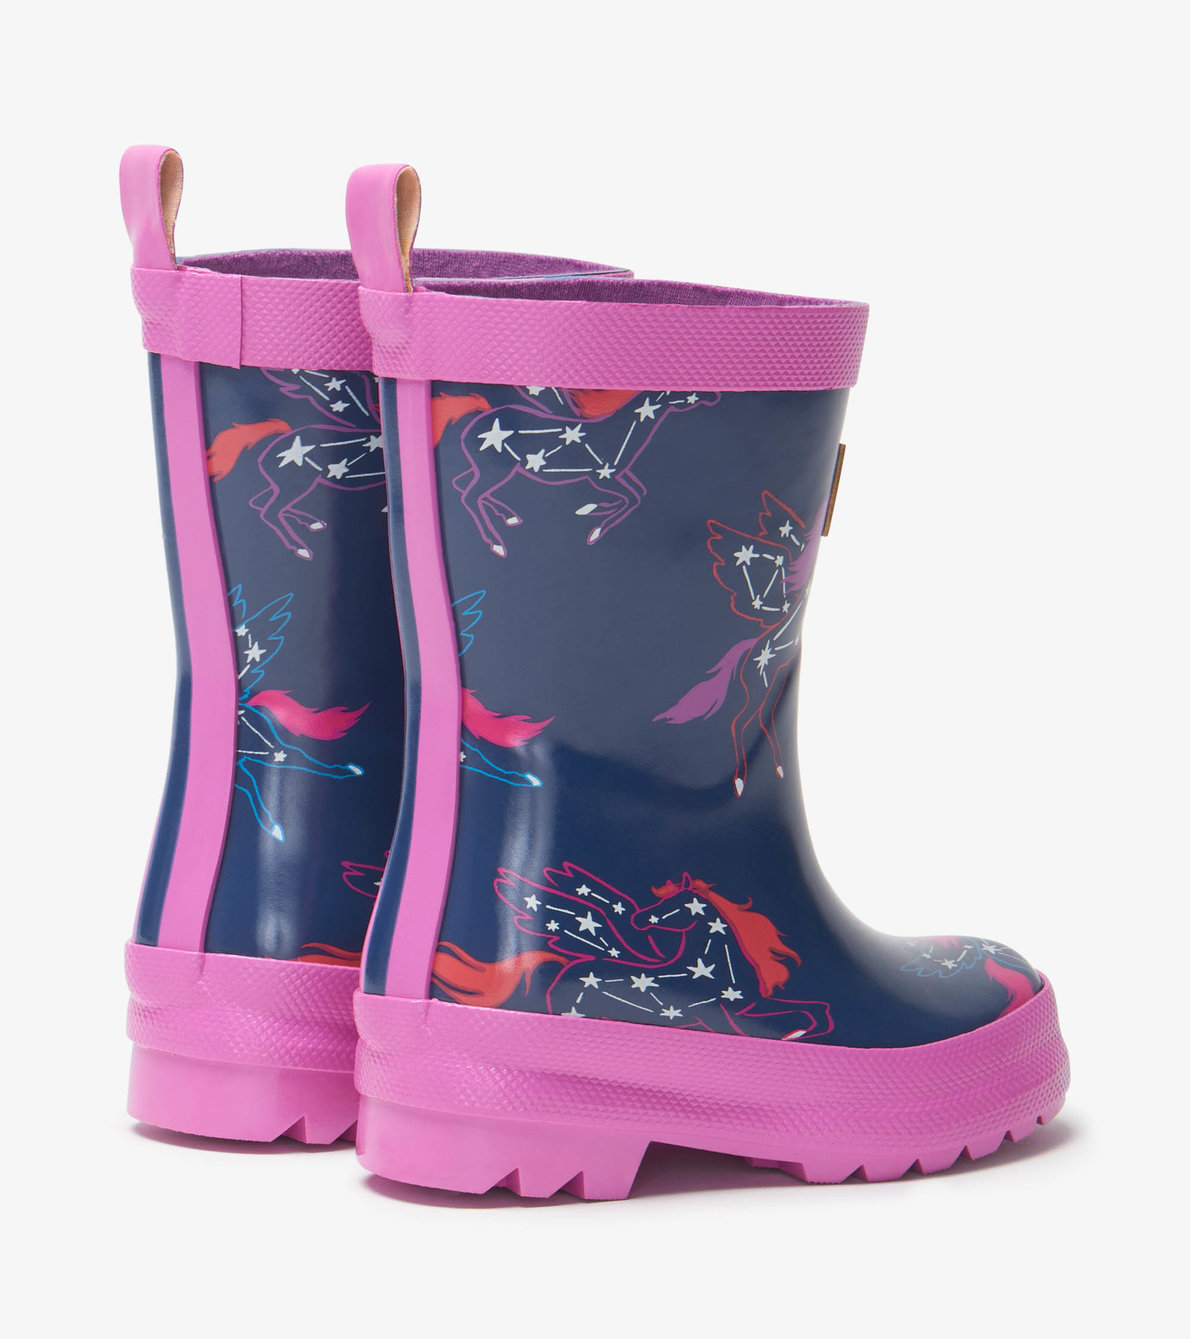 View larger image of My 1st Rain Boots - Pegasus Constellations